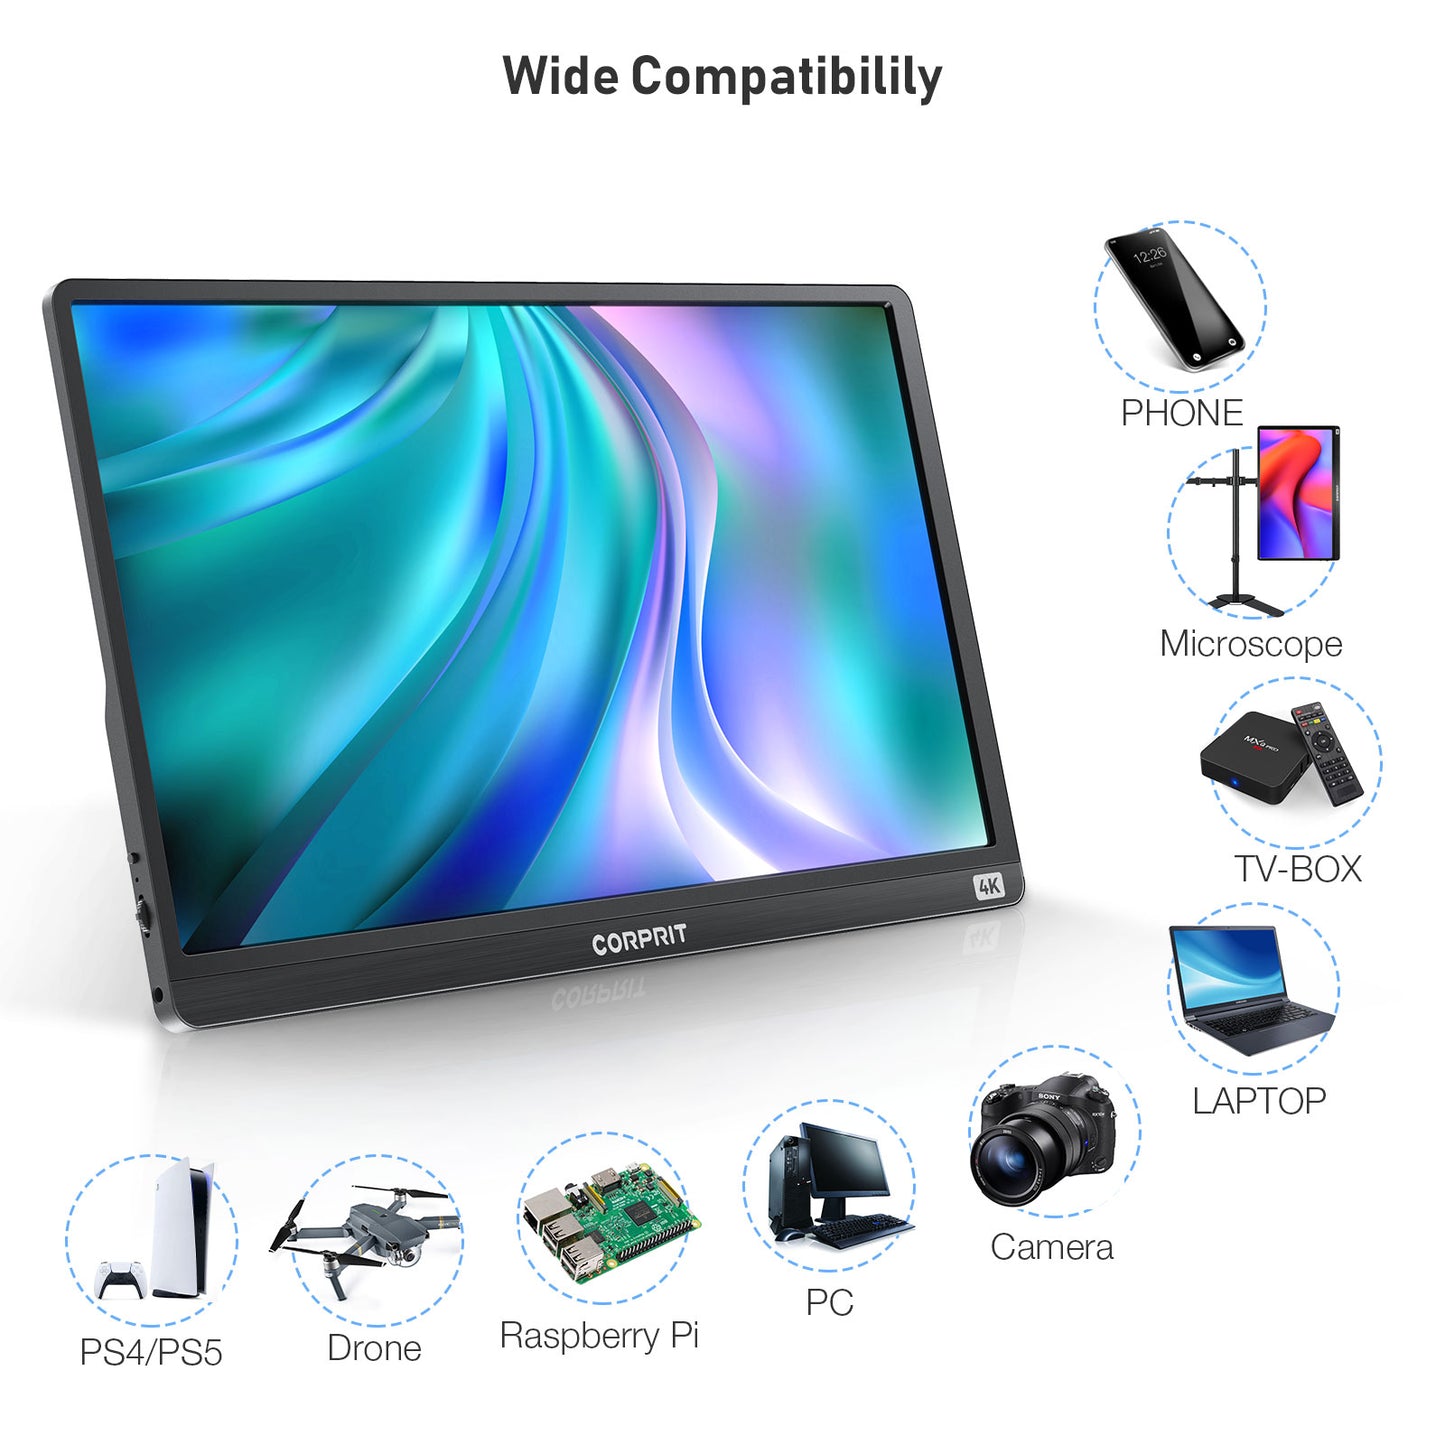 Corprit 4k UHD Portable Monitor 15.6" IPS Portable Screen sRGB Extend Second Screen USB C HDMI Gaming Monitor Smart Cover Dual Speakers Computer Display for PC MAC Phone